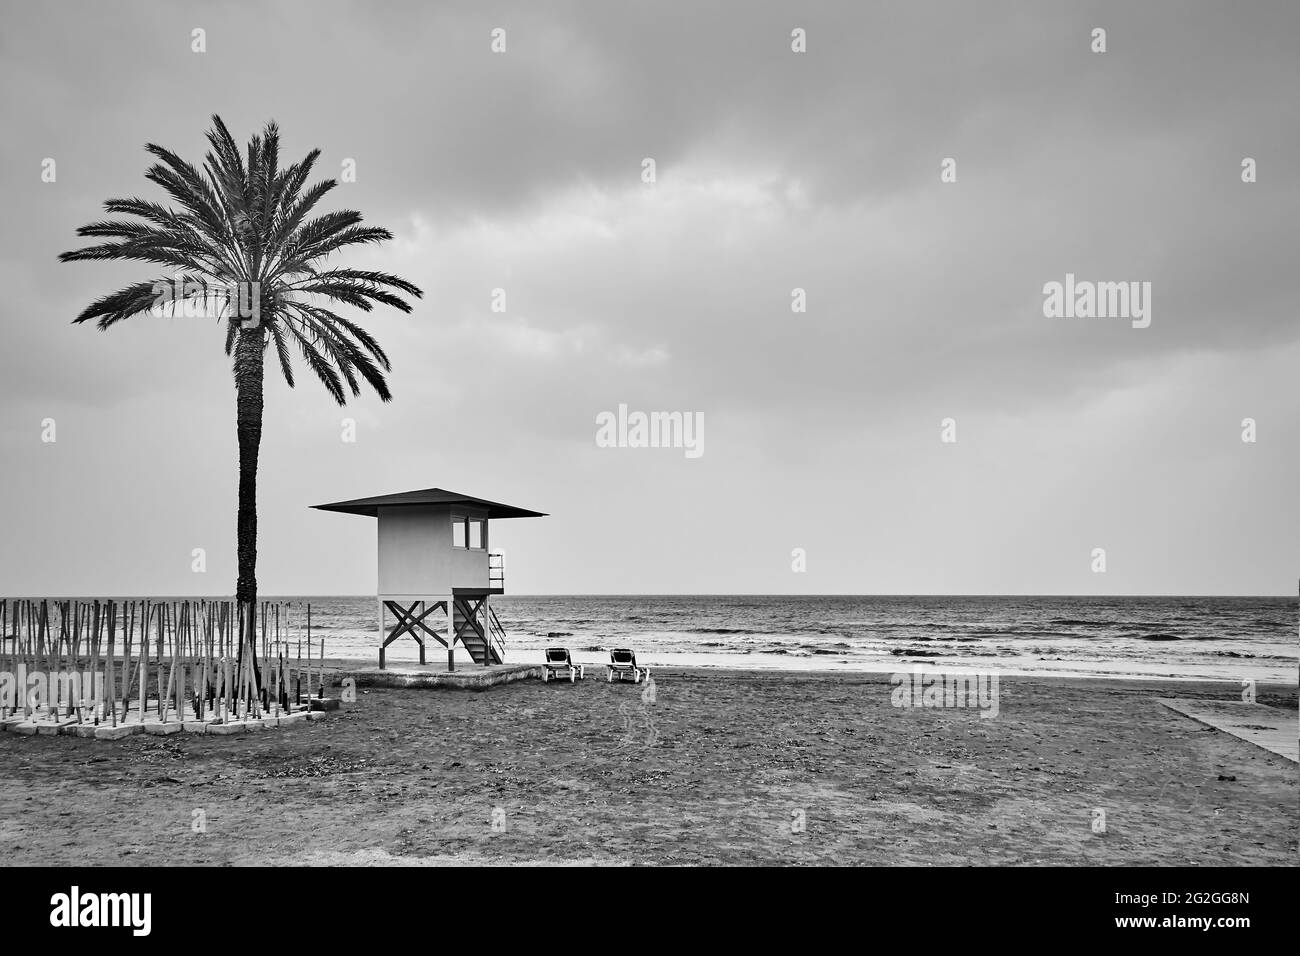 Desolate beach with palm and lifeguard tower by the sea. Black and white photography, landscape Stock Photo